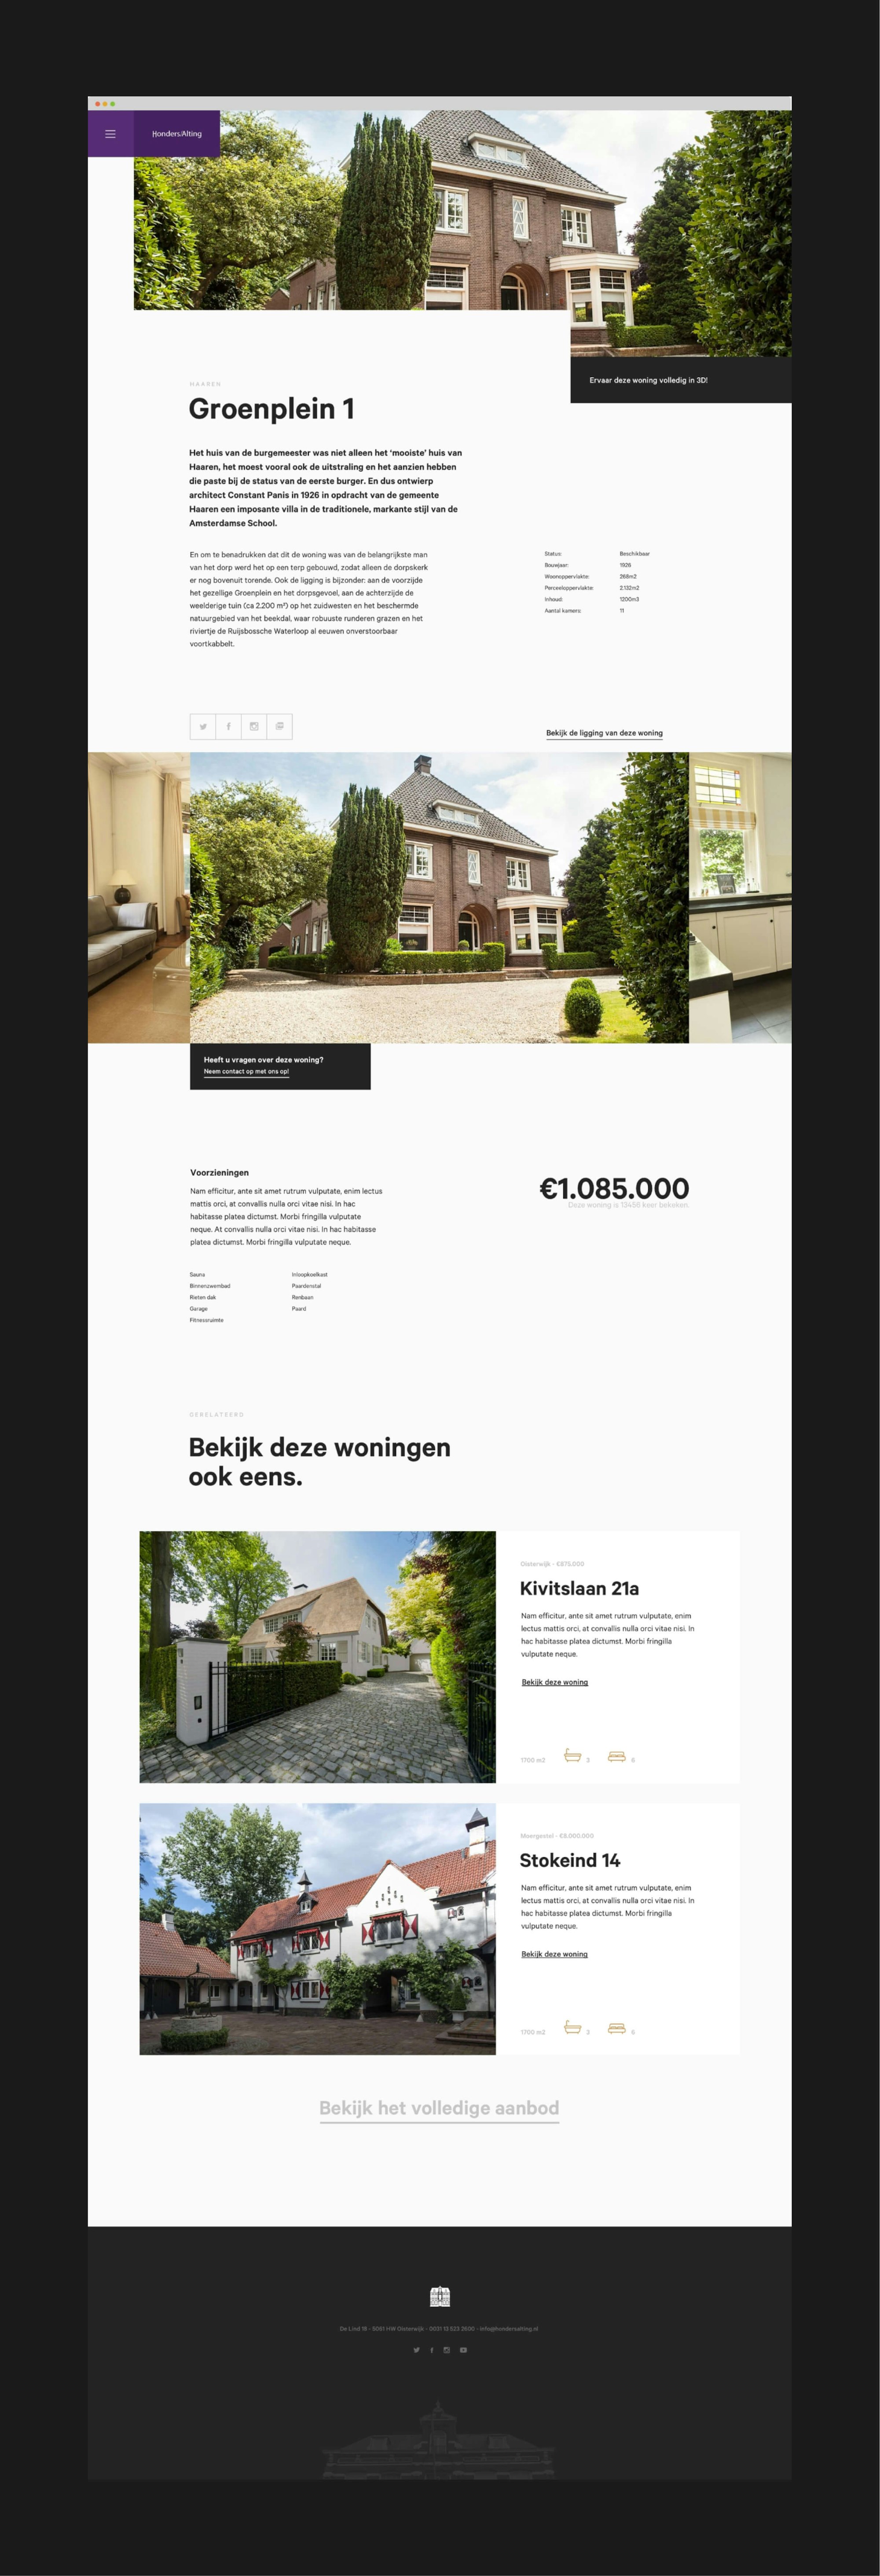 honders-alting-house-detail-page